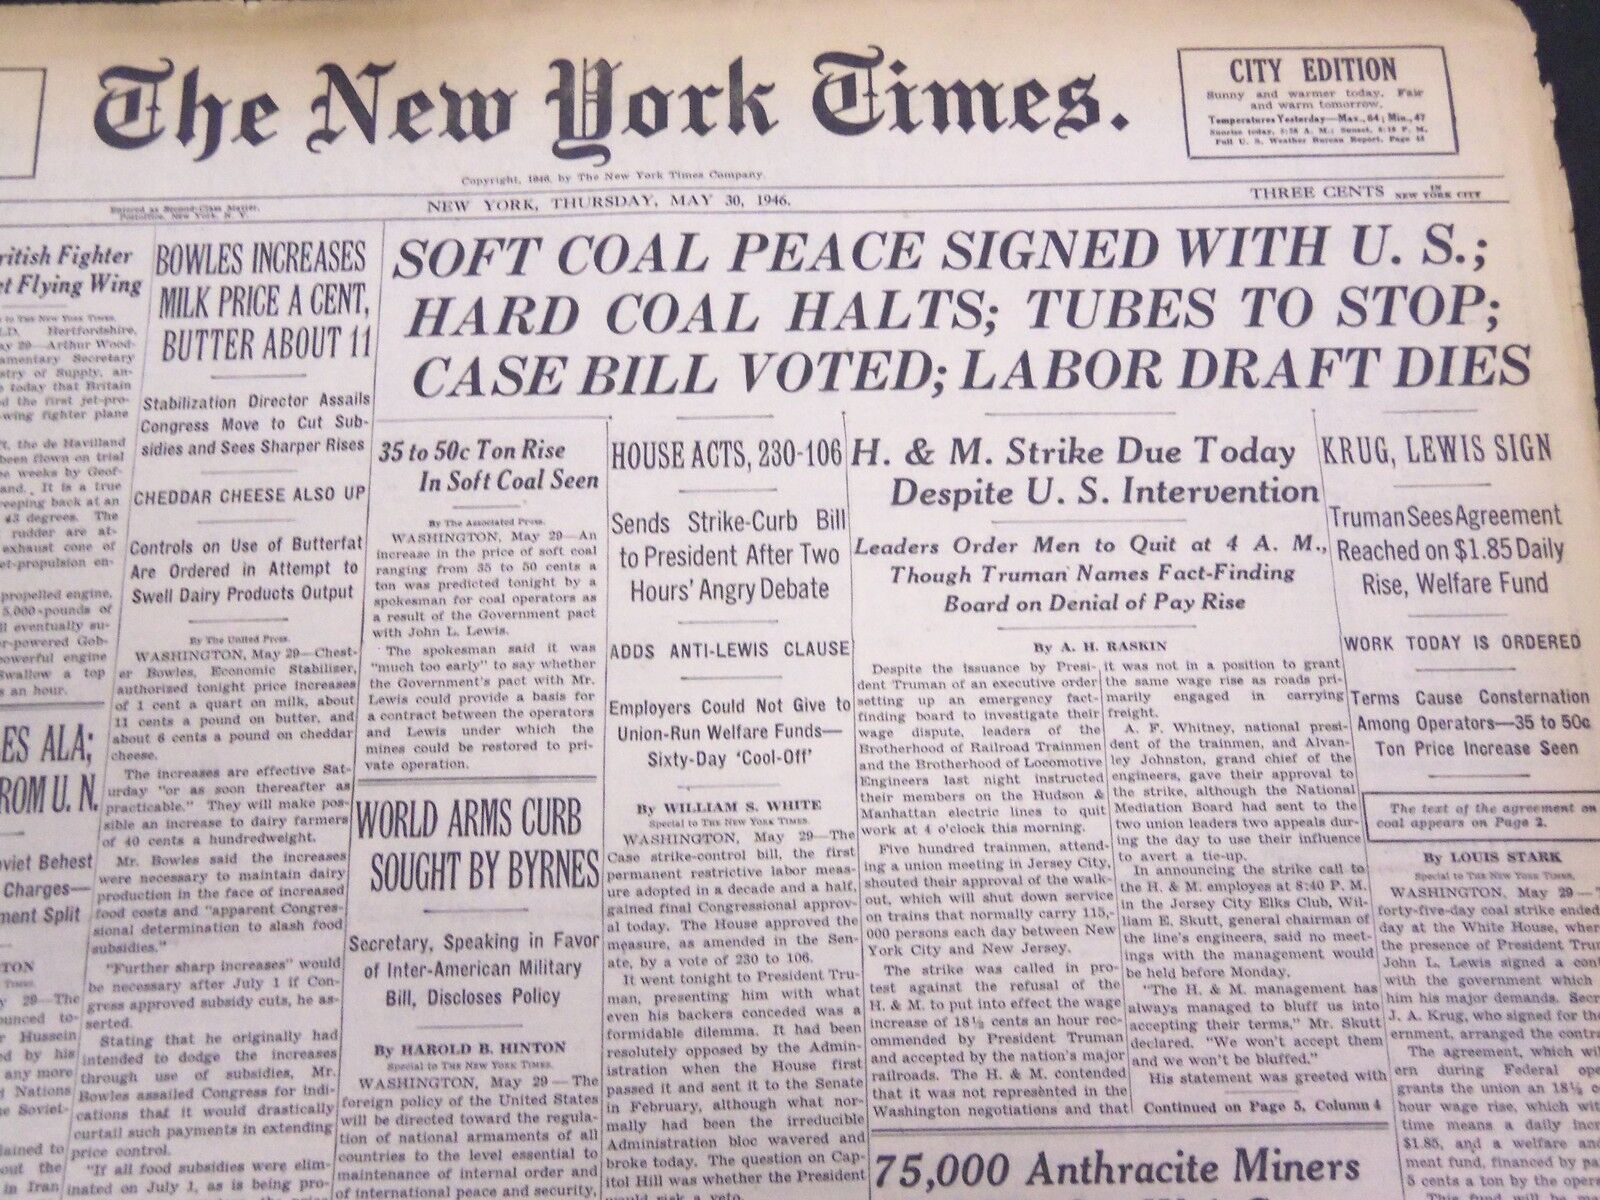 1946 MAY 30 NEW YORK TIMES - SOFT COAL PEACE SIGNED - NT 4239